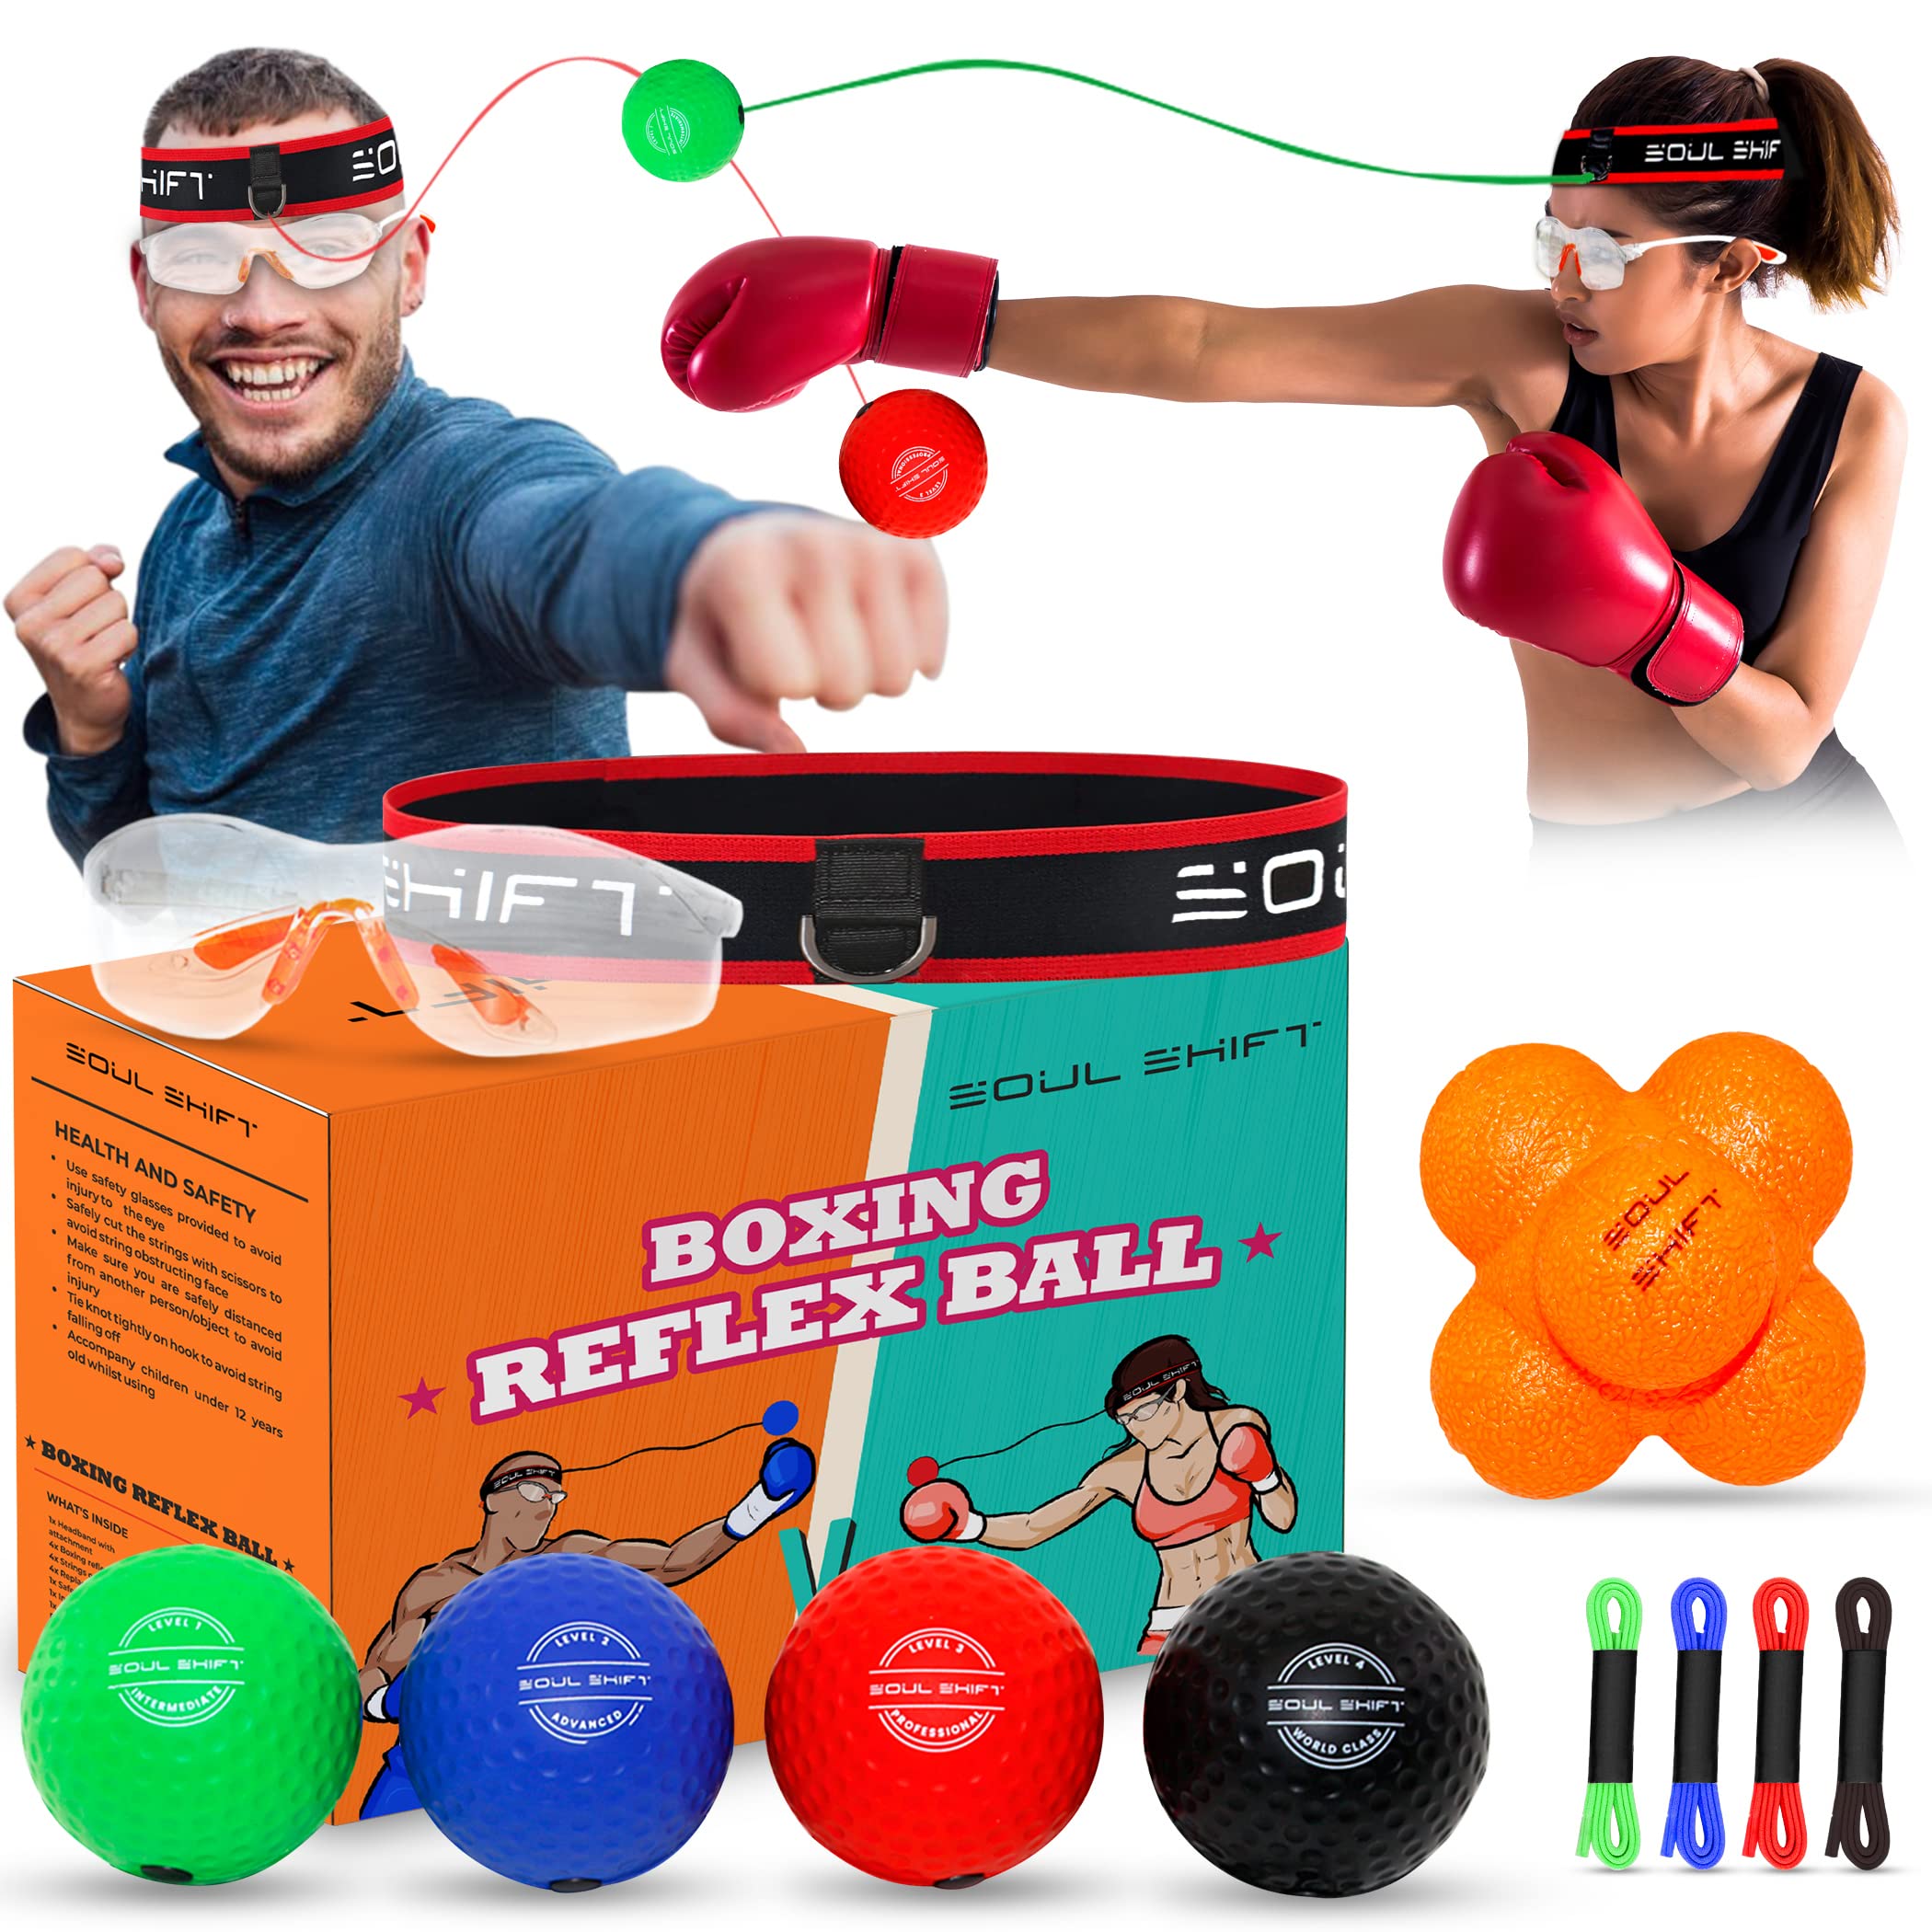 Boxing Reflex Ball - Improve Reaction Speed and Hand Eye Coordination  Training Boxing Equipment for Training at Home,Boxing Reflex Ball with